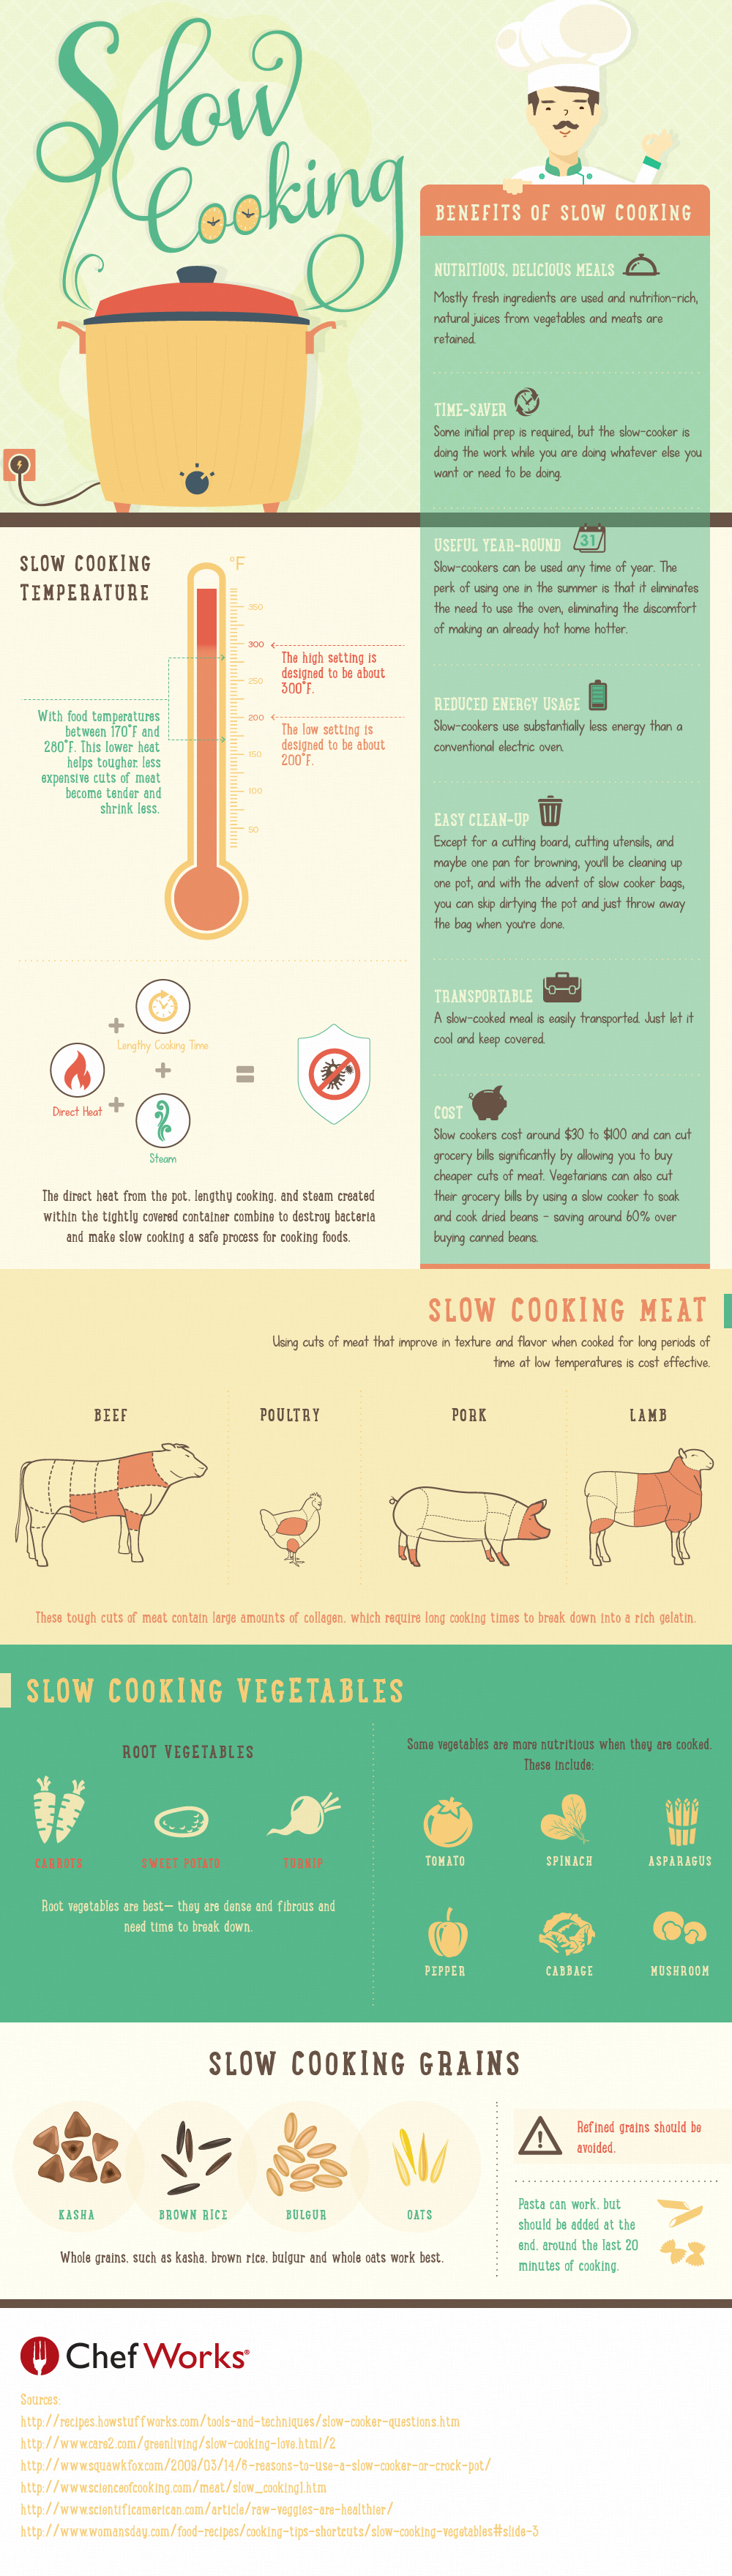 Slow Cooking 2.0-01 (1)